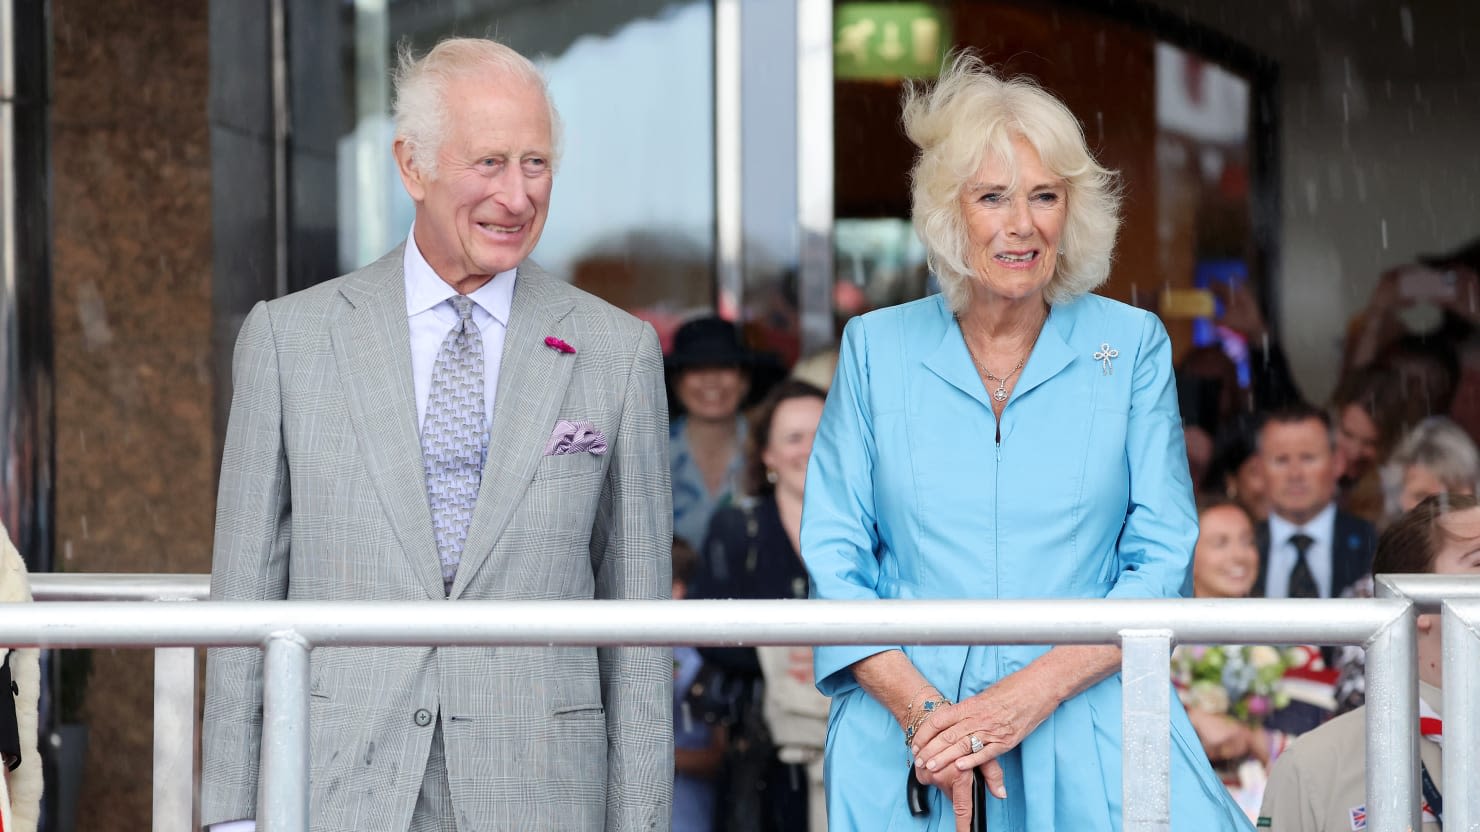 King Charles and Queen Camilla Were Rushed From Event Over a Rooftop Sniper Scare